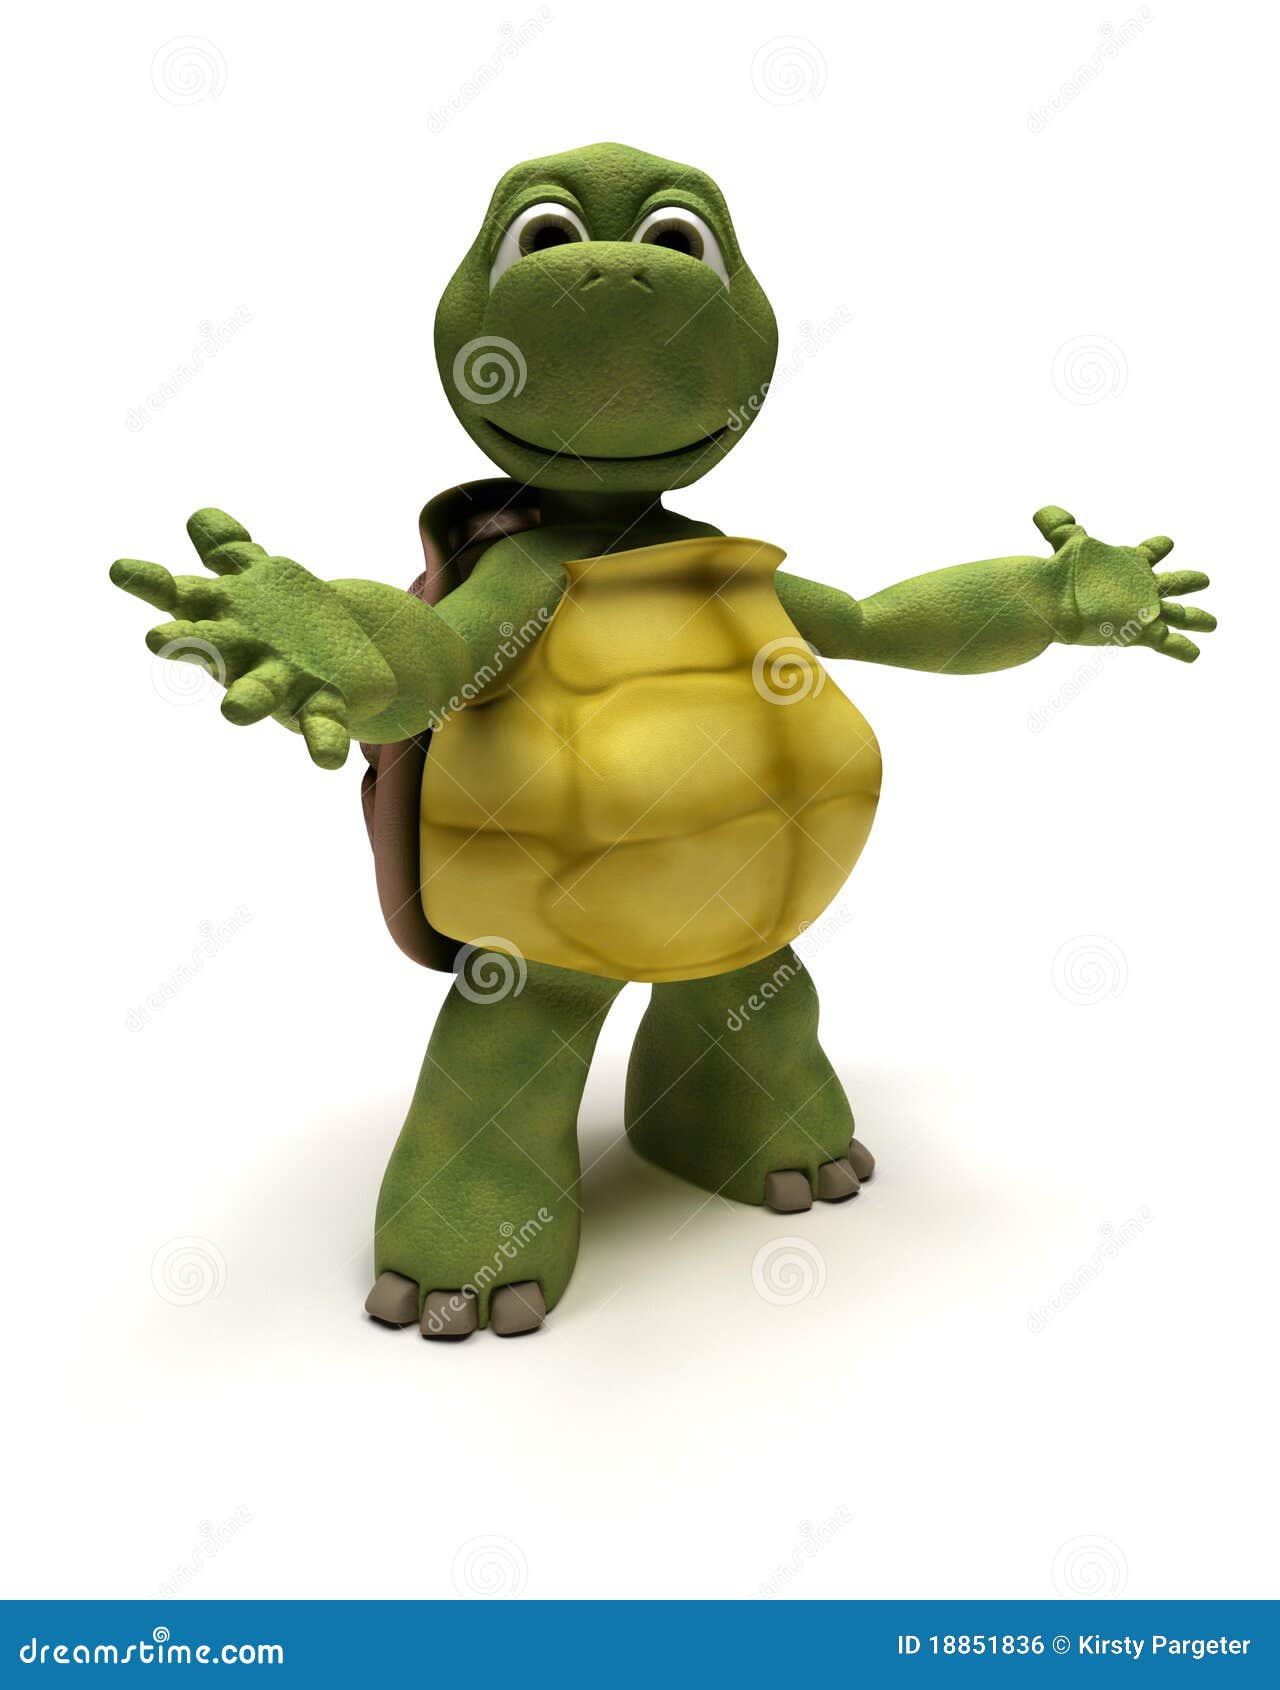 tortoise in an introduction pose